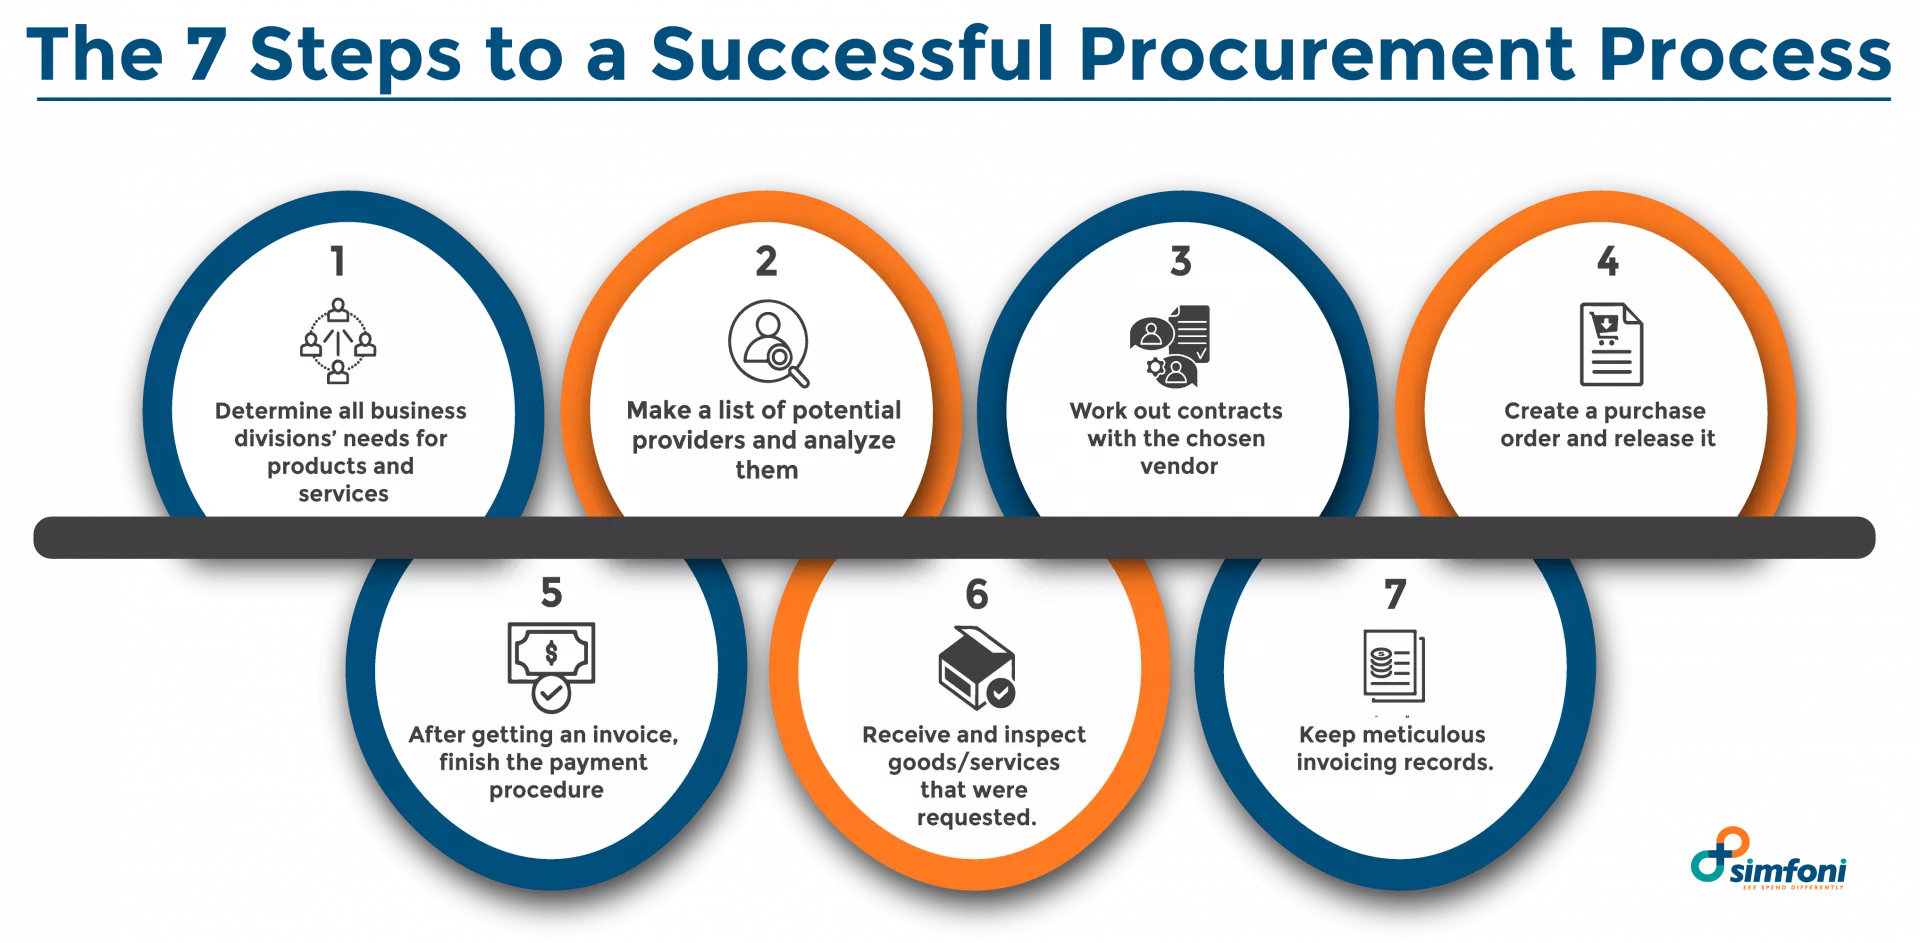 An empowered team can help your startup business make its procurement process more effective. 